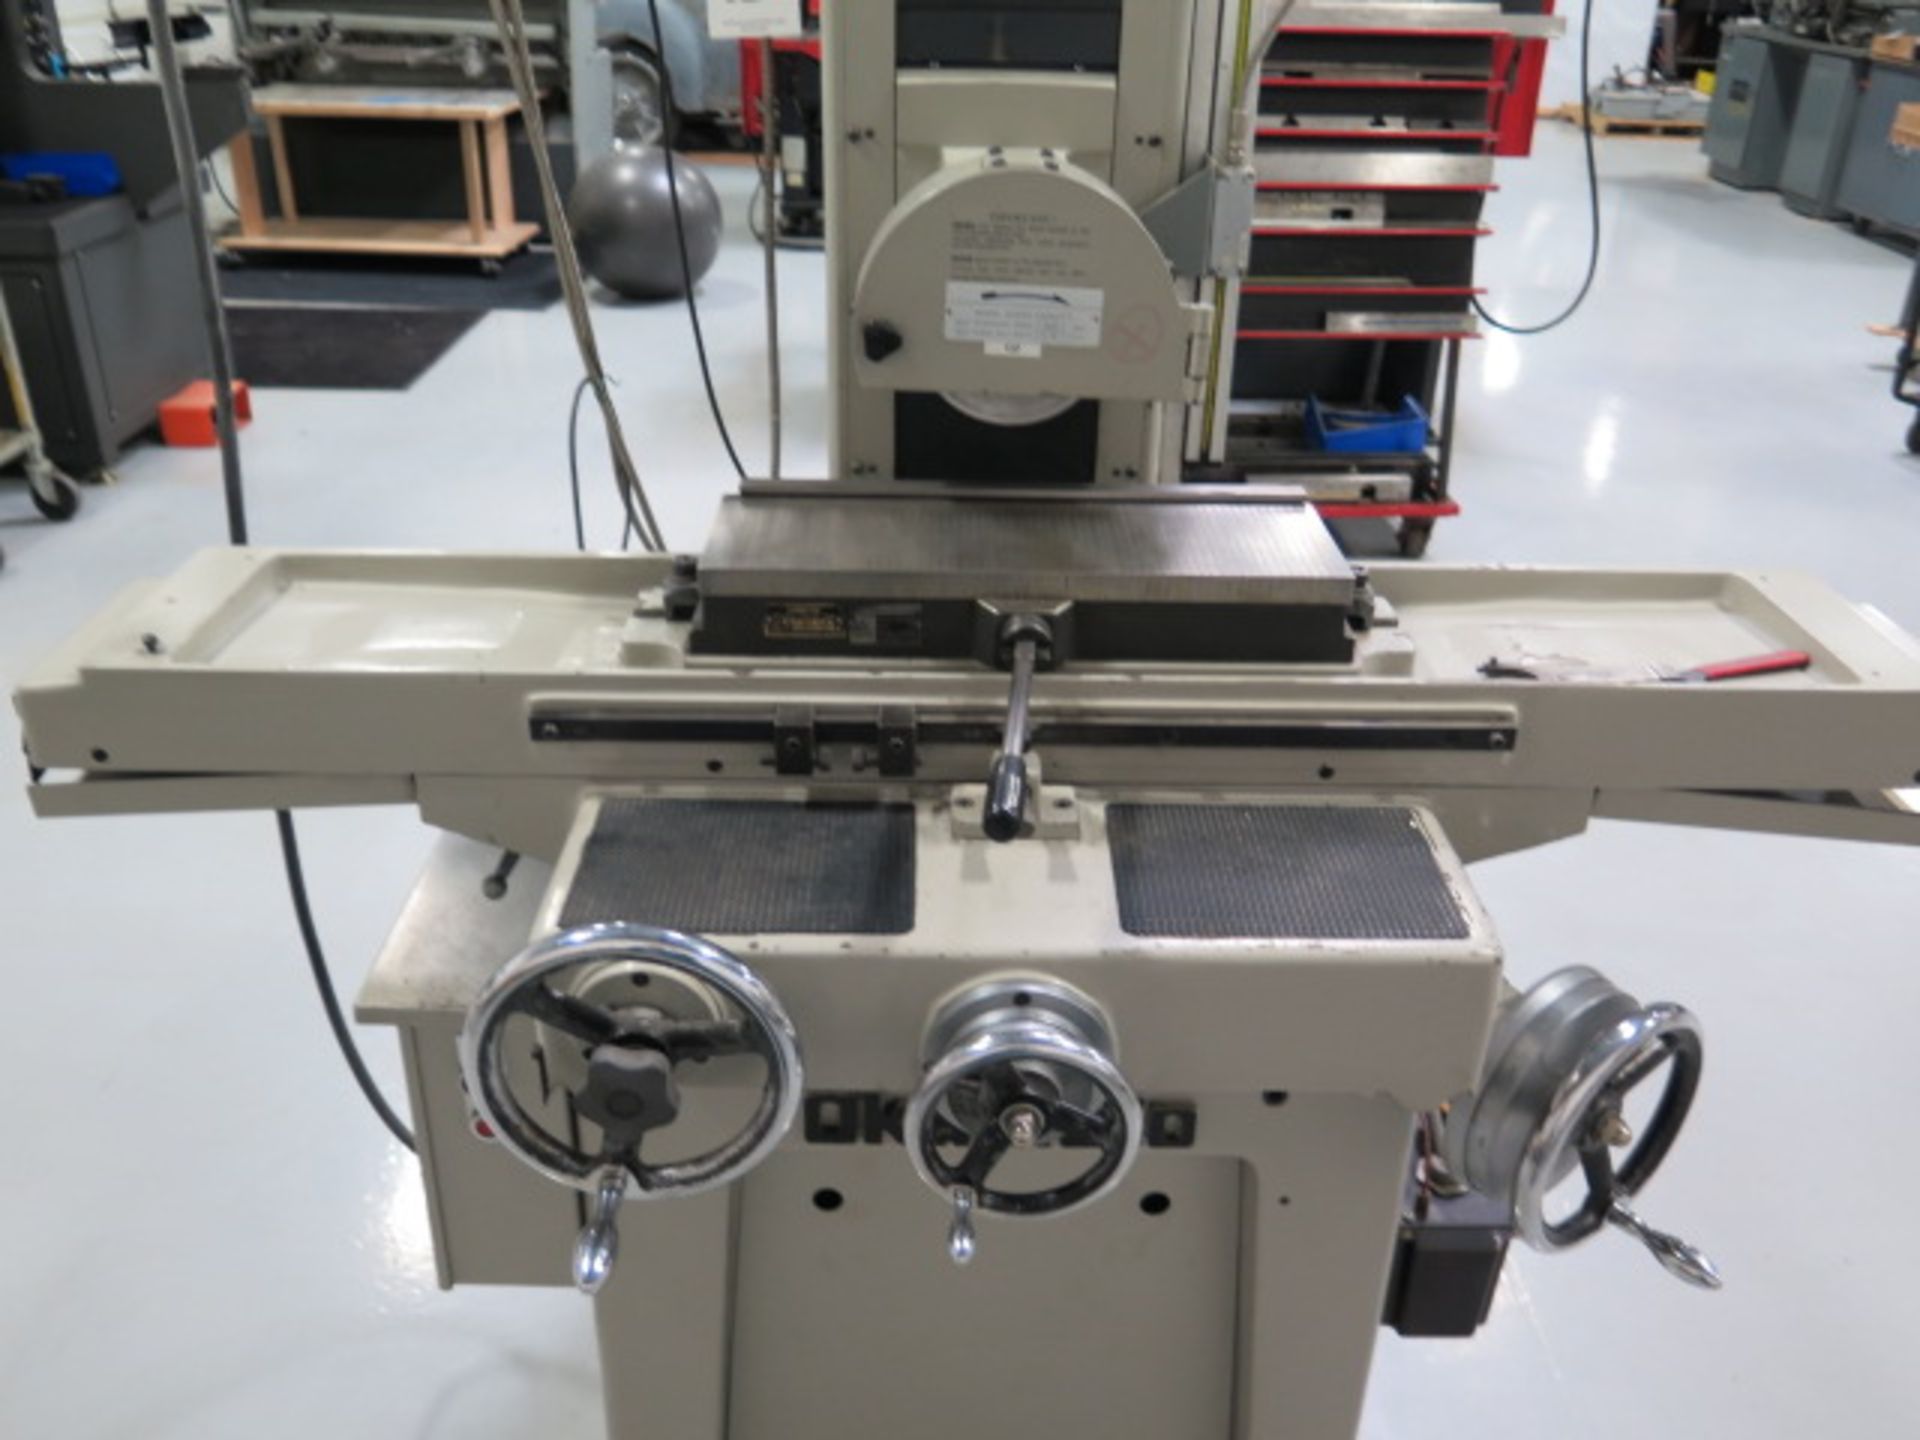 Okamoto “6-18 LINEAR” 6” x 18” Surface Grinder s/n 4469 w/ Mitutoyo UDR-220 Program DRO, SOLD AS IS - Image 5 of 15